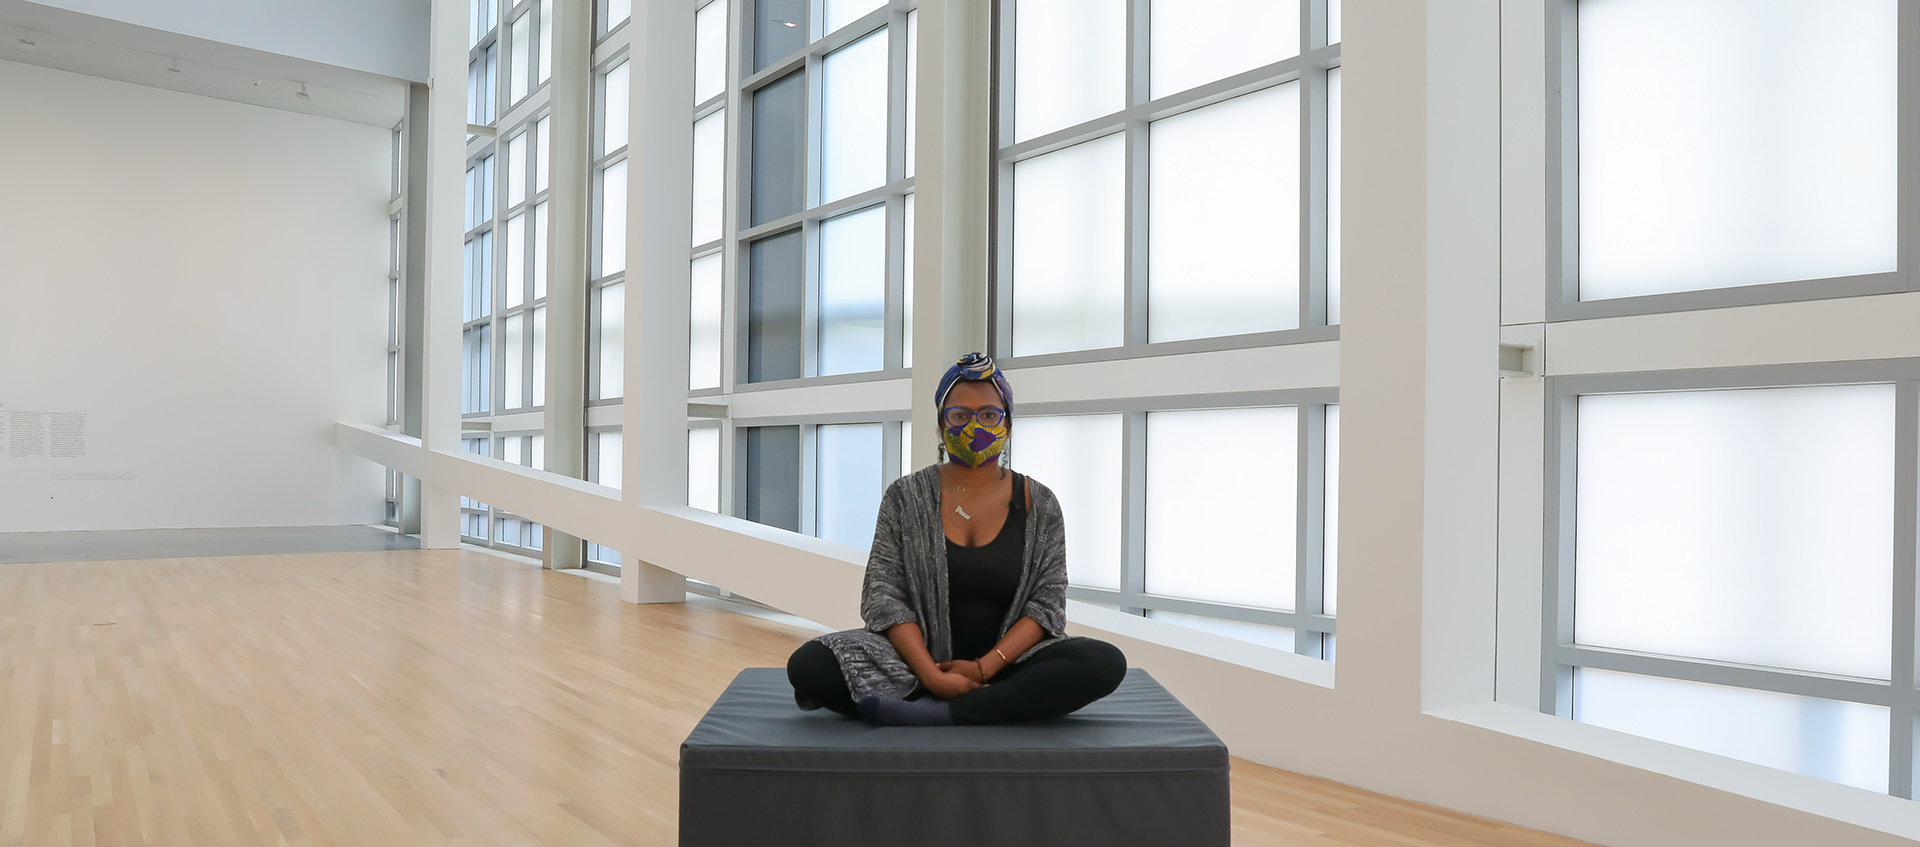 A woman sits on a foam block in the center of an empty gallery space. 